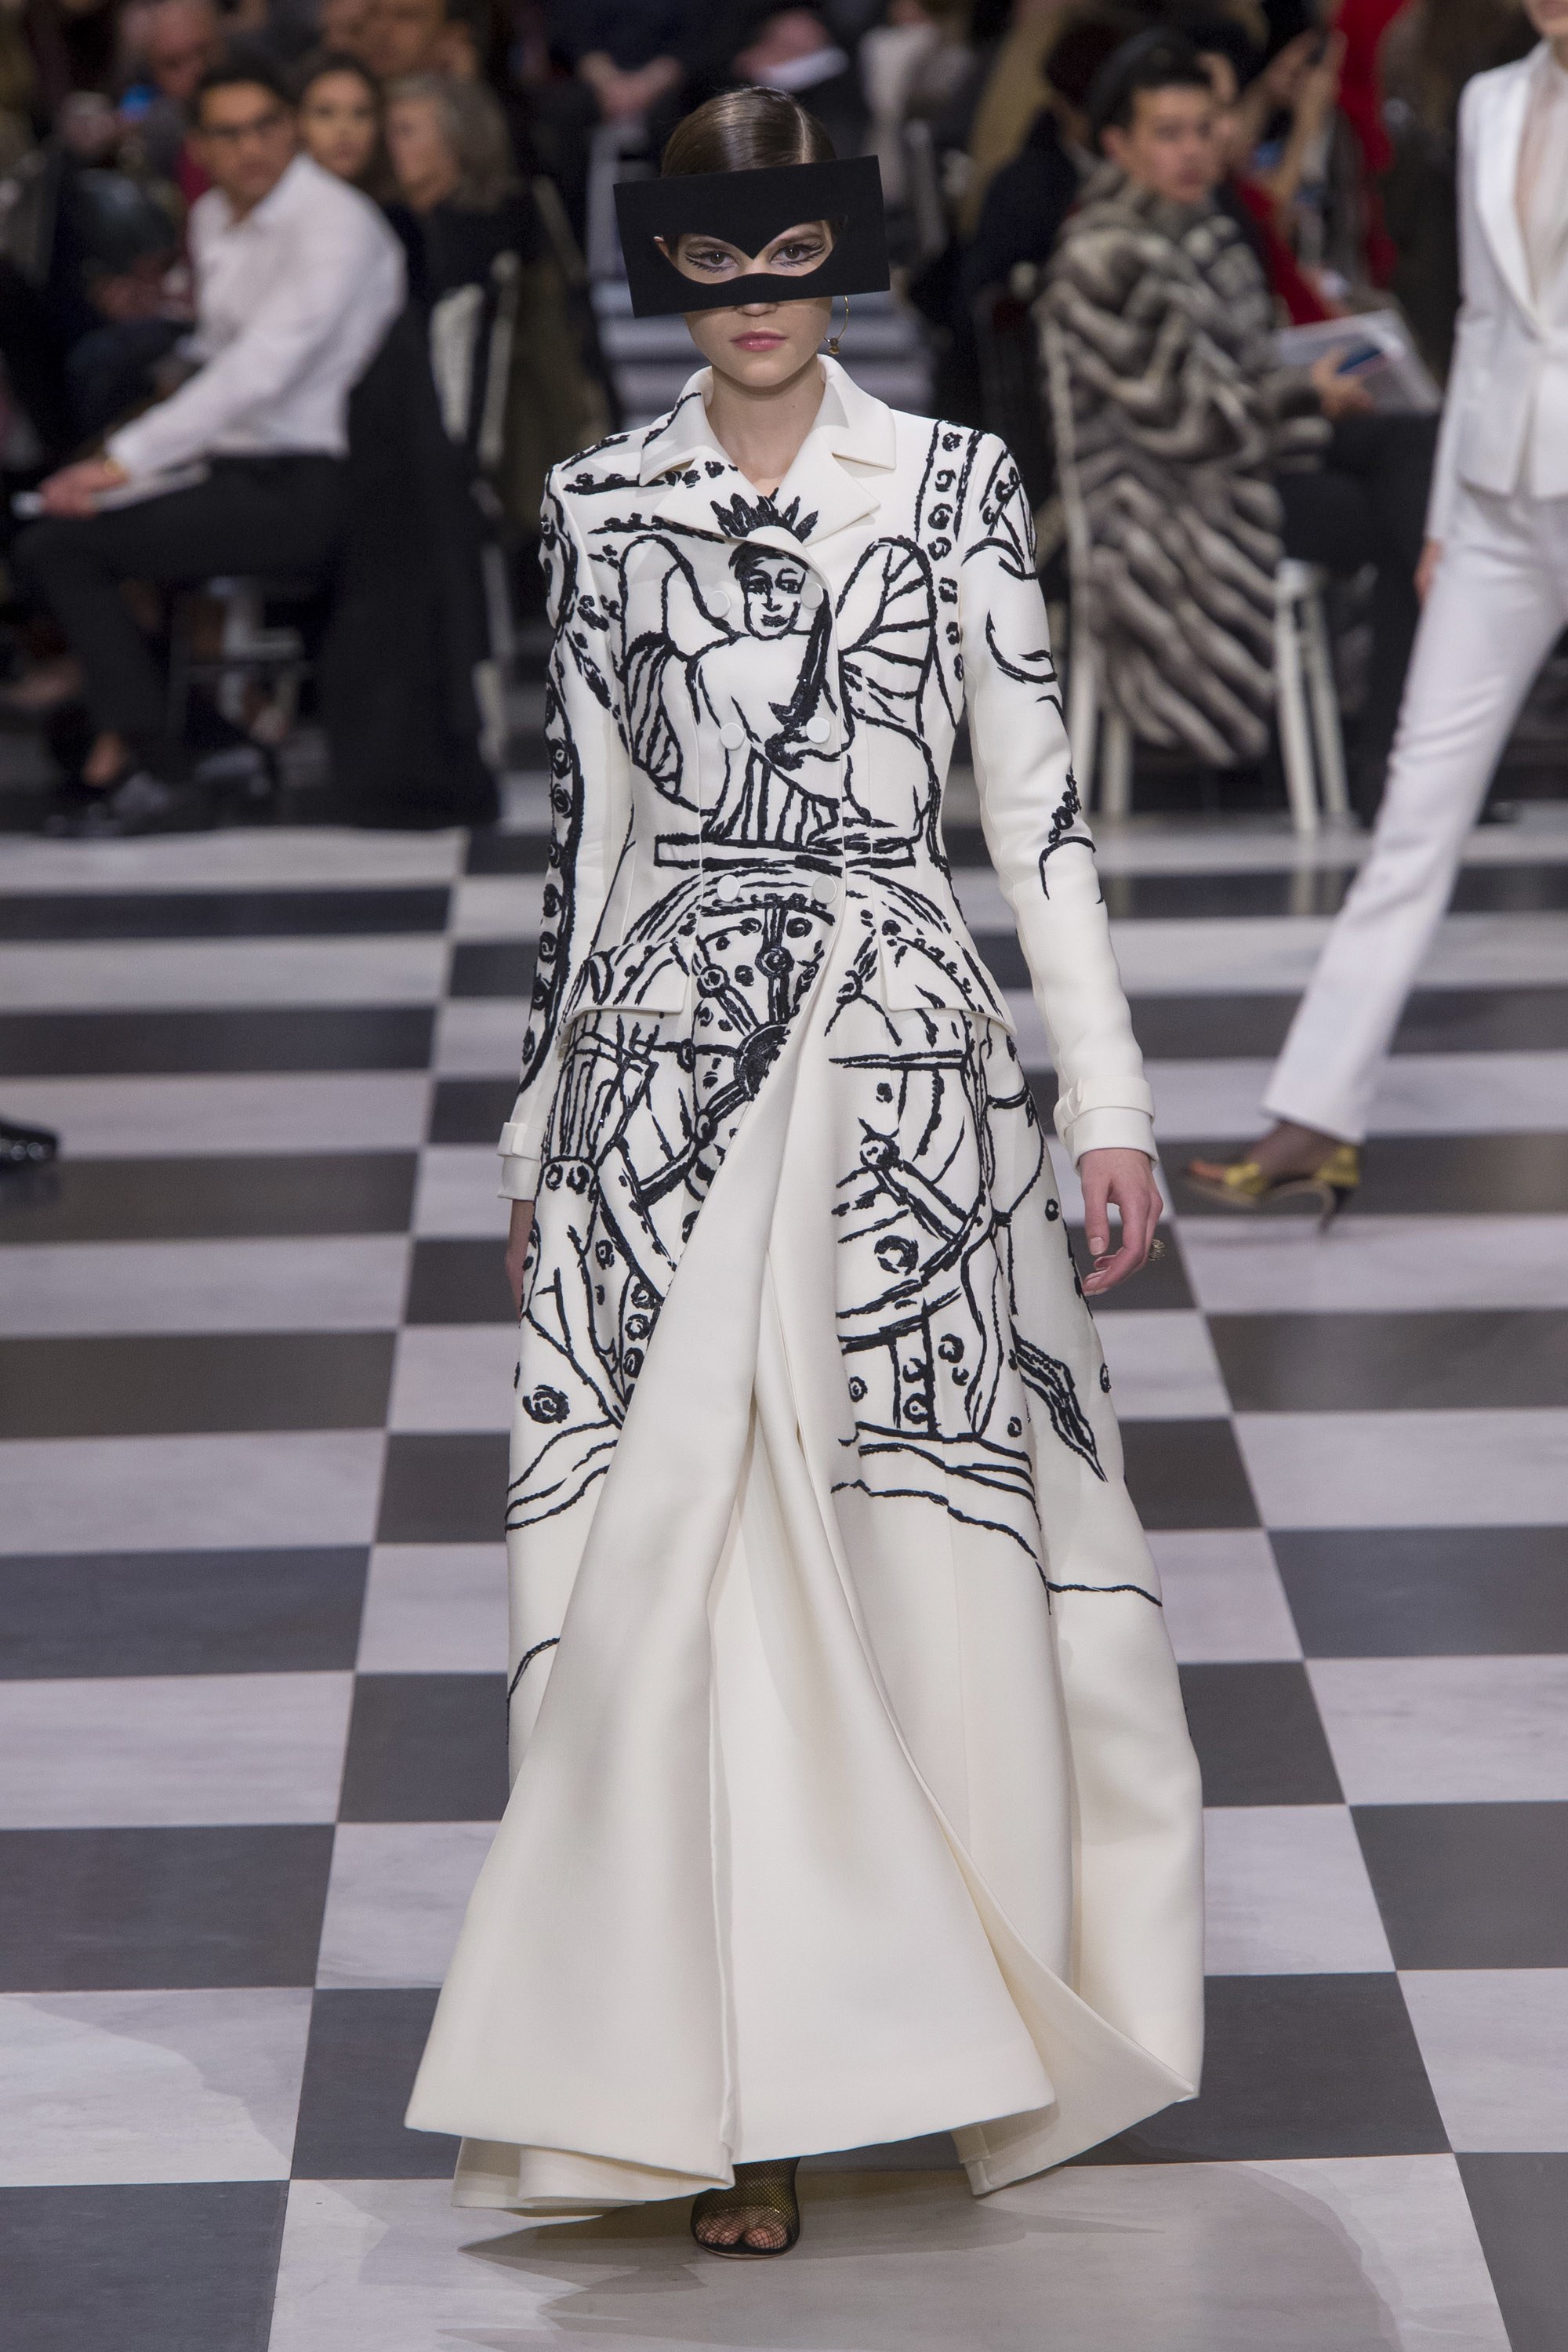 historical dramatics,Christian Dior Couture 2018 Forever Chic by Meg